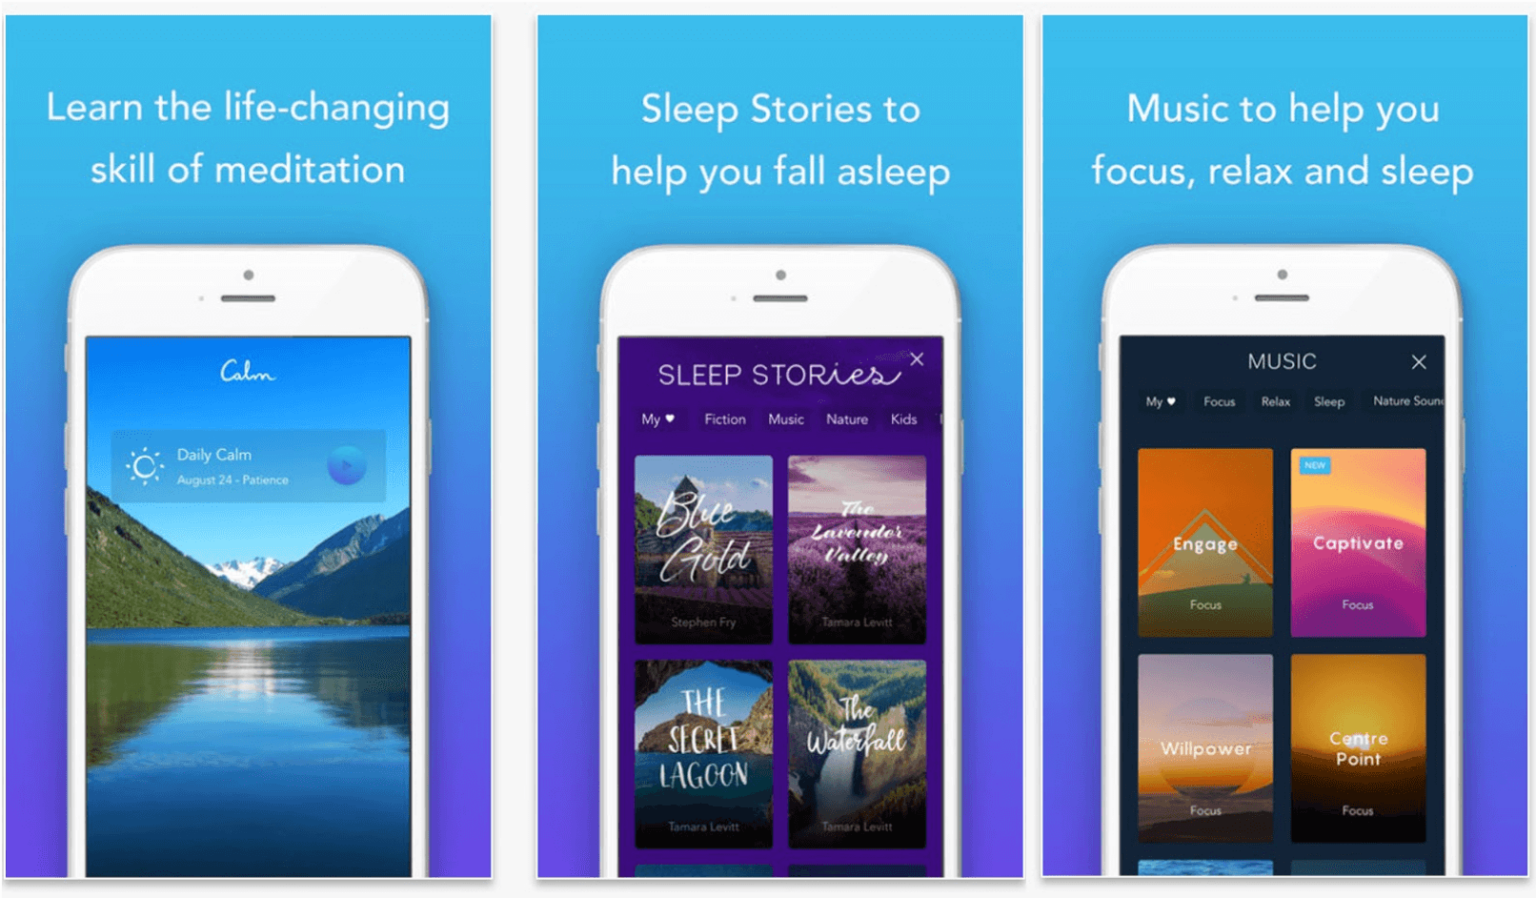 13 Inspiring App Store Product Shot Ideas For Your Startups iPhone App ...